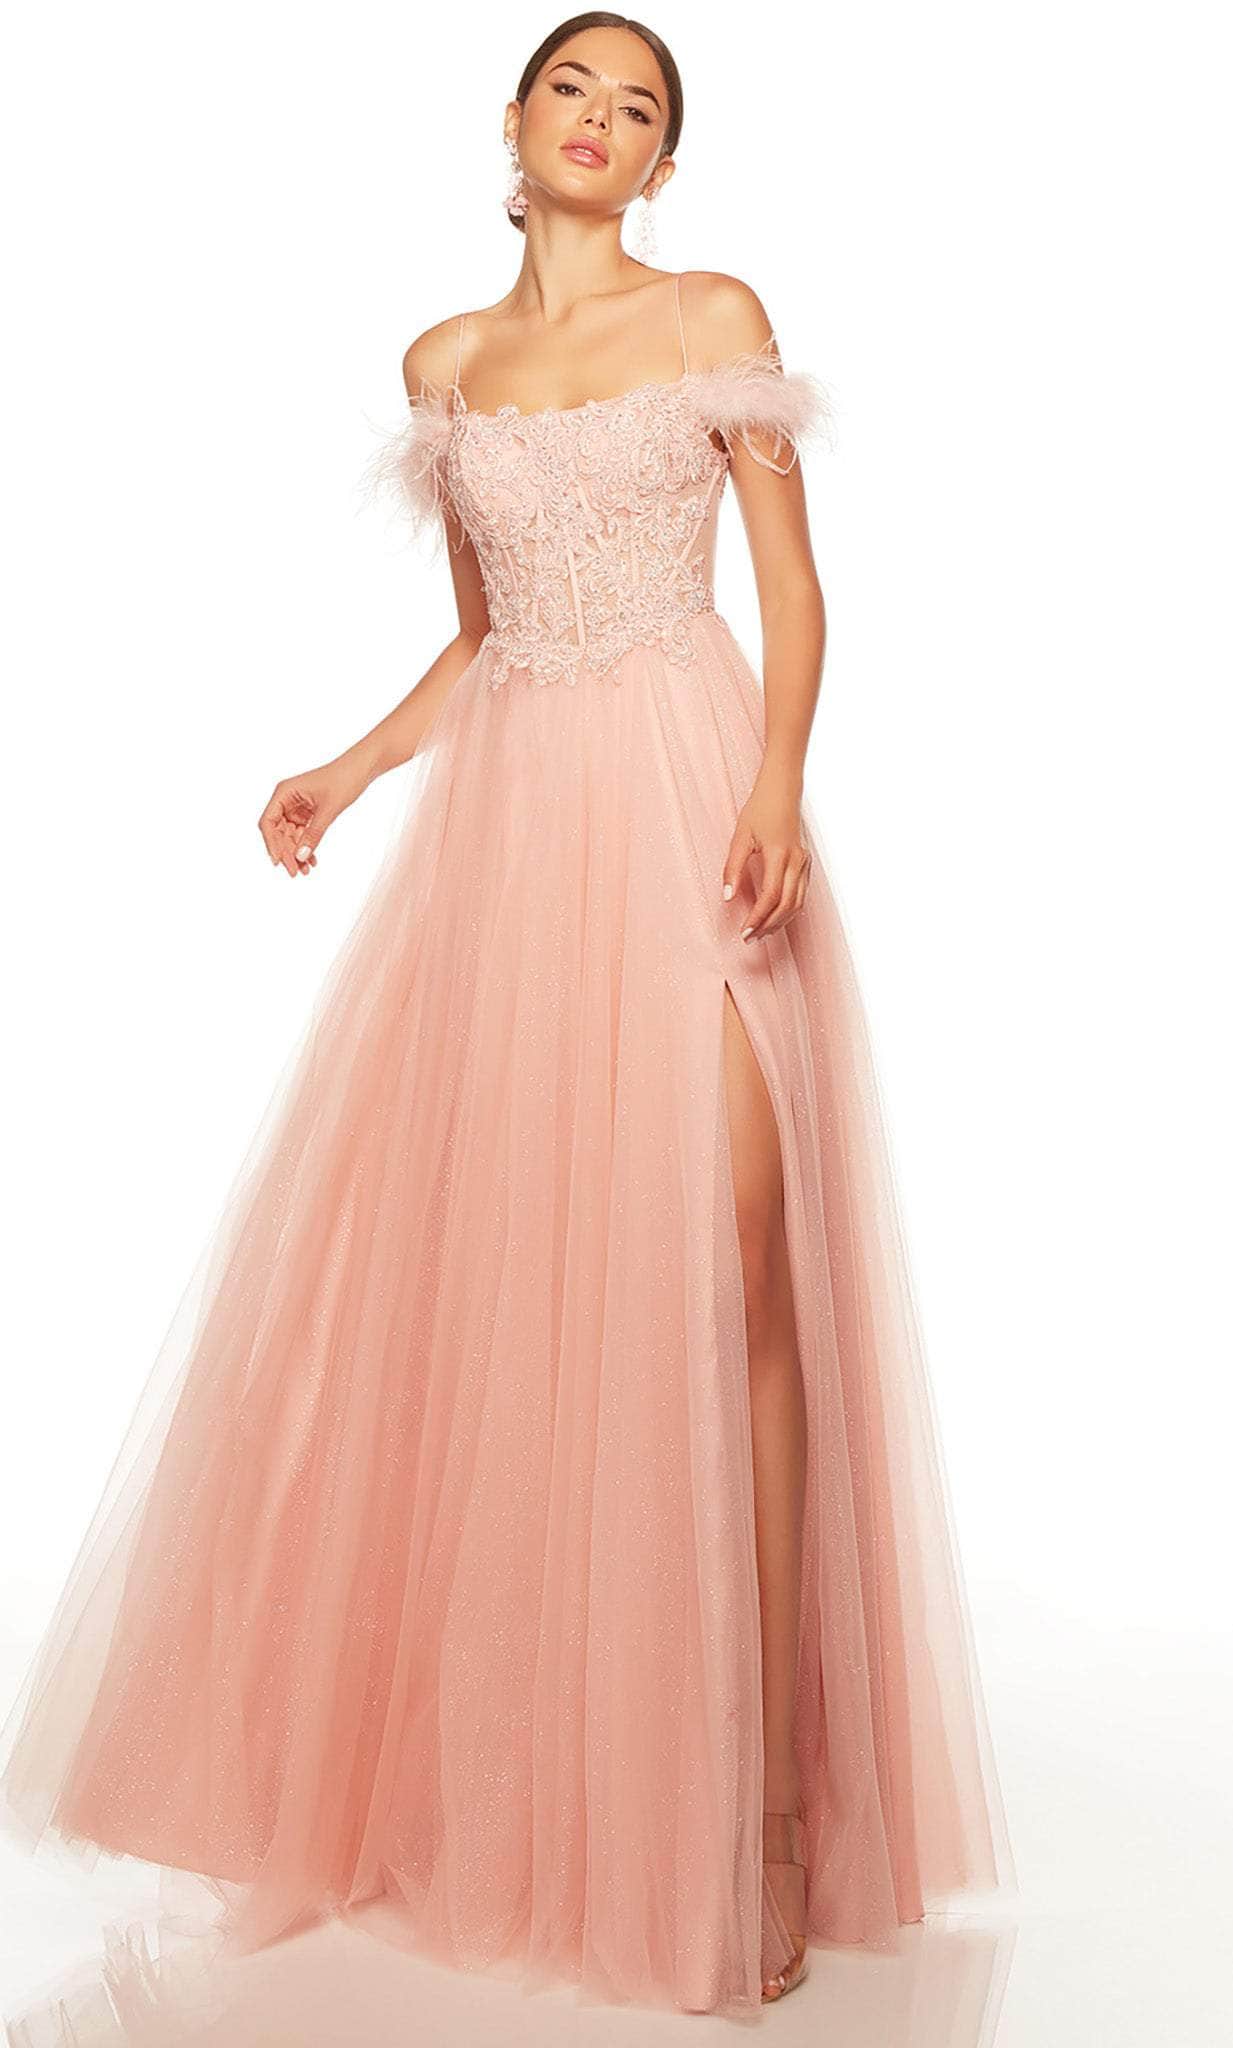 Alyce Paris 61328 - Feather Detailed Off Shoulder Evening Gown
